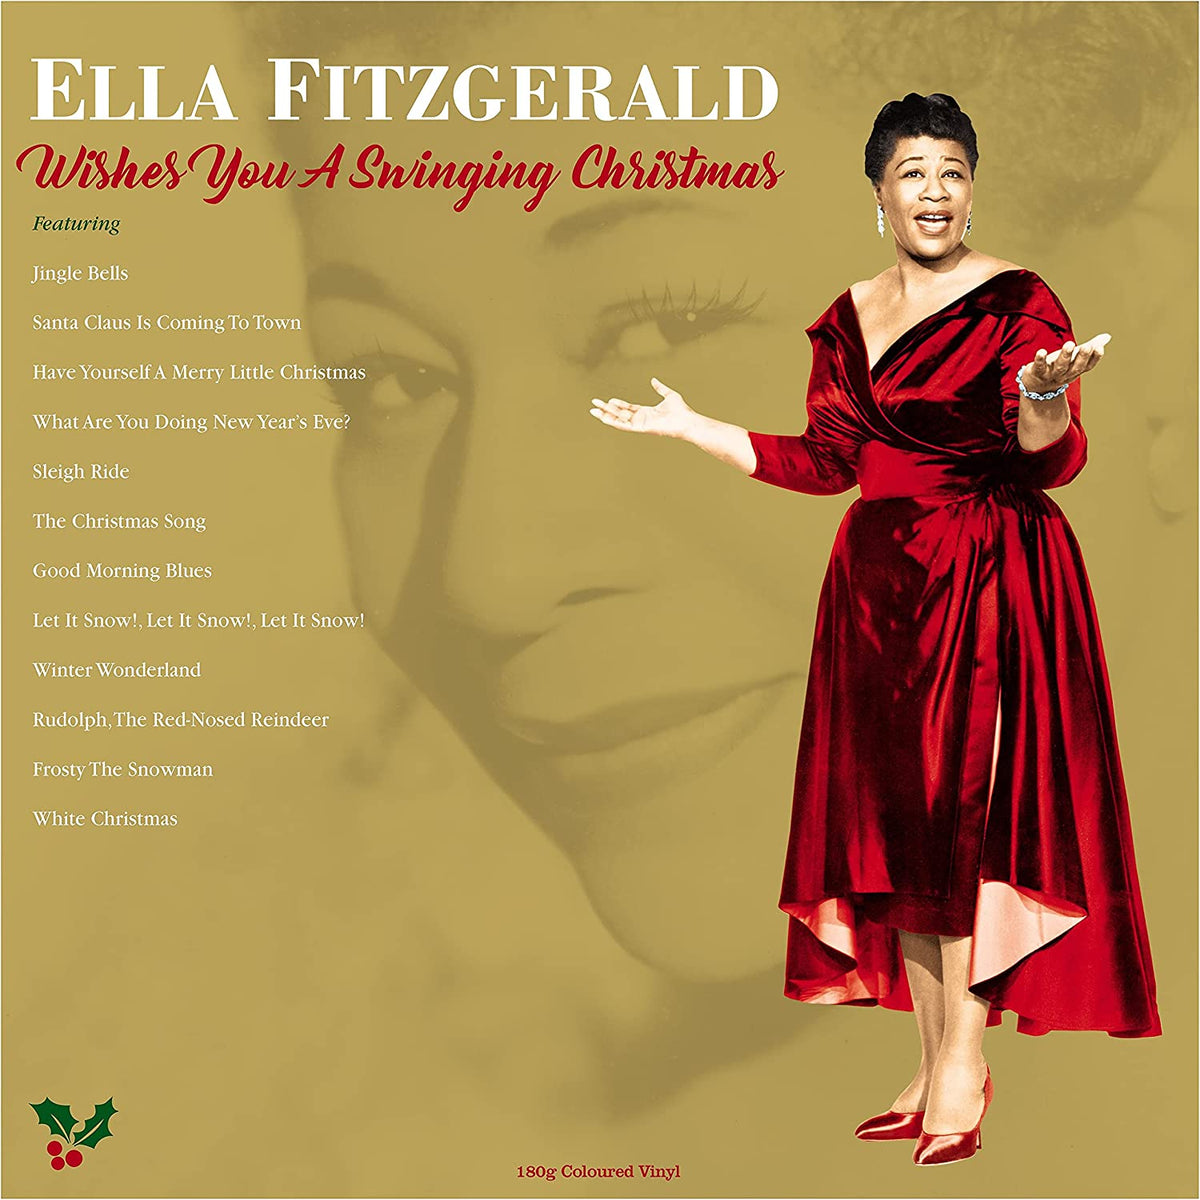 Ella Fitzgerald - Wishes You A Swinging Christmas (LP)